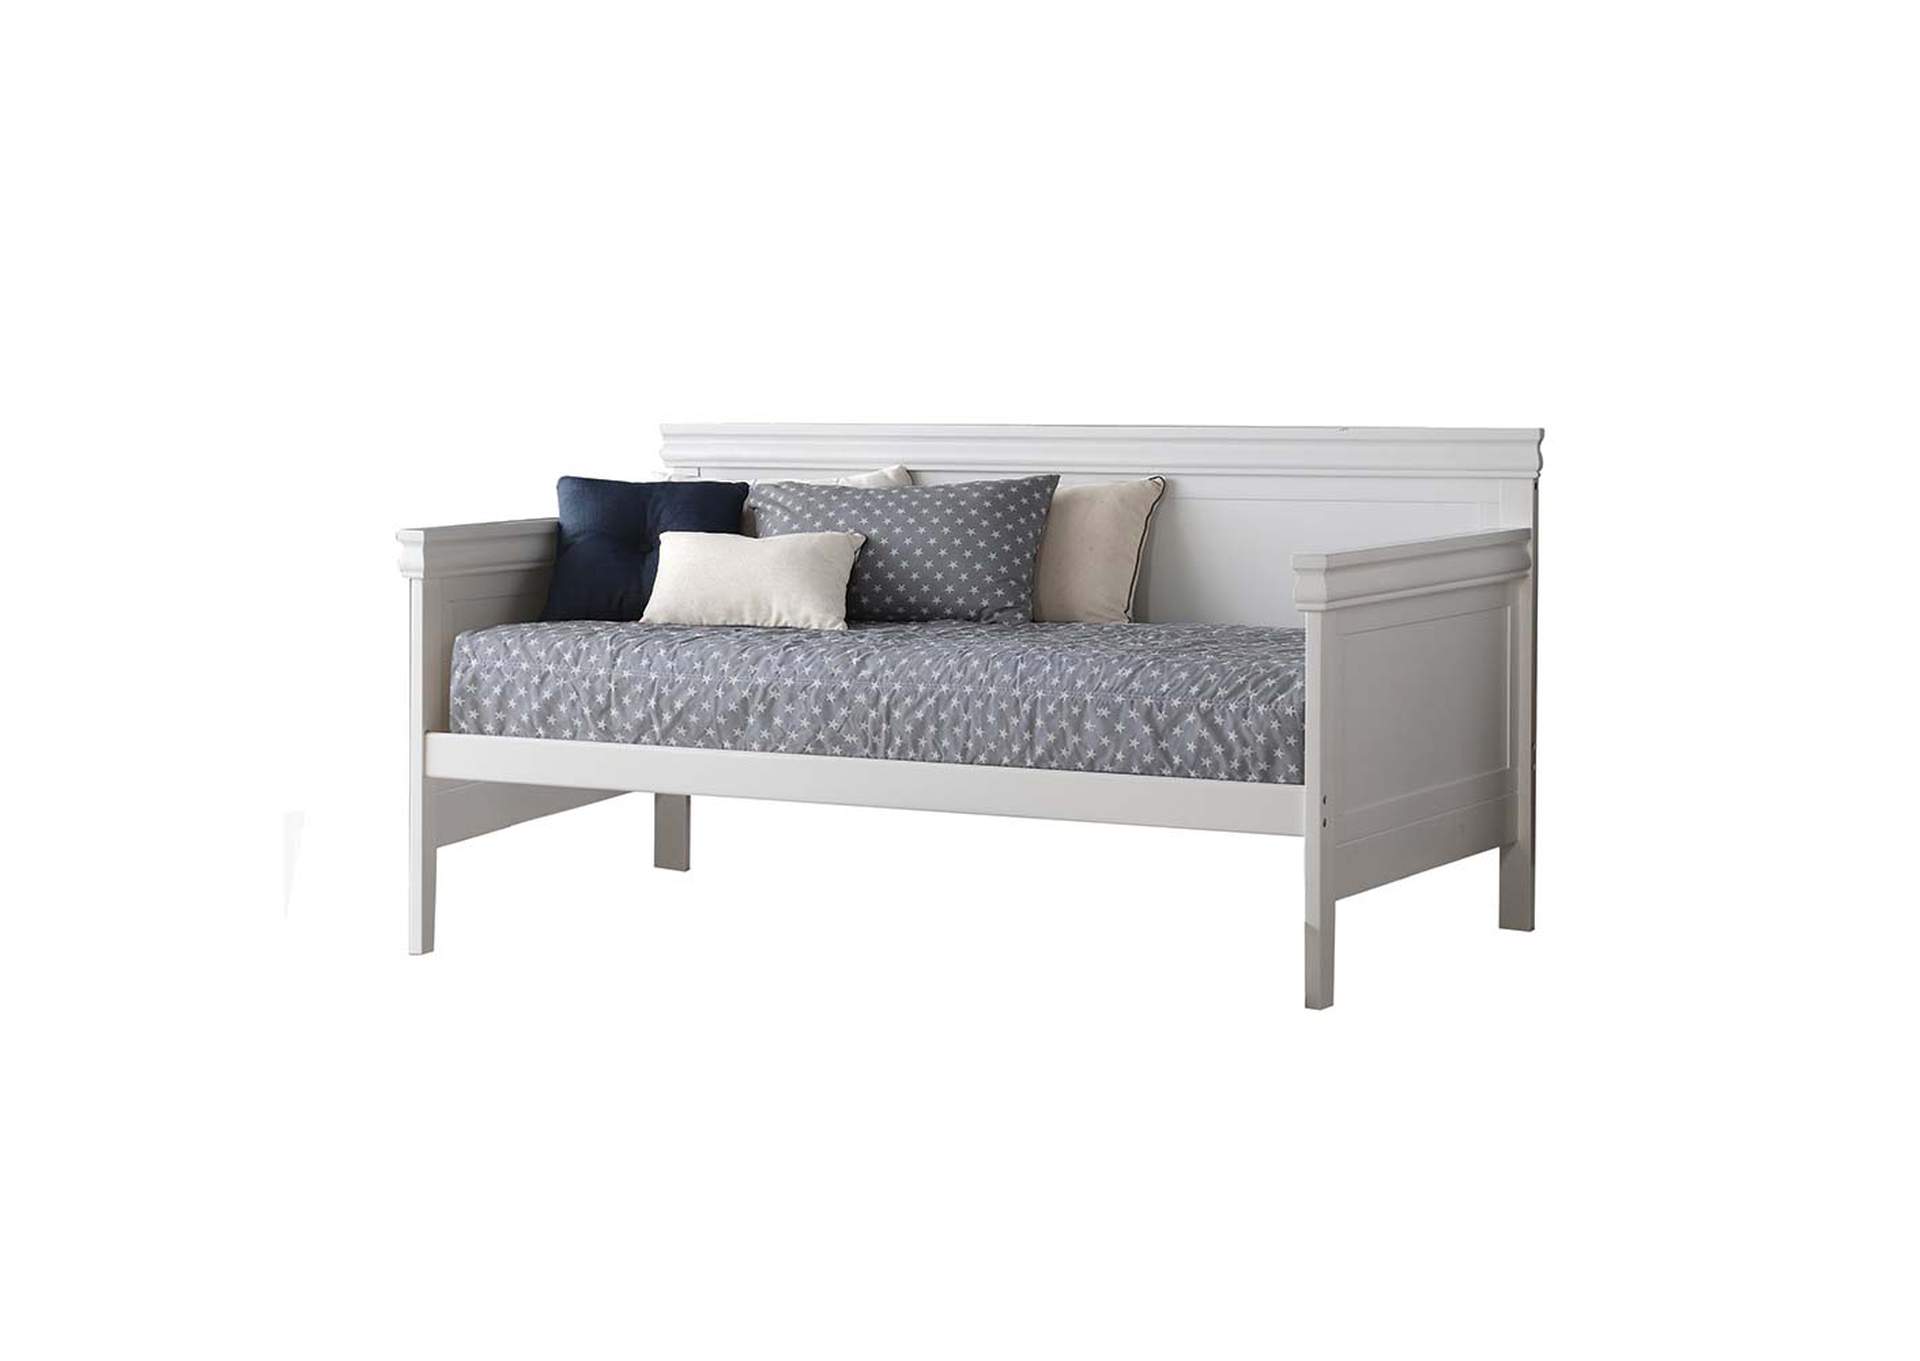 Bailee White Daybed,Acme